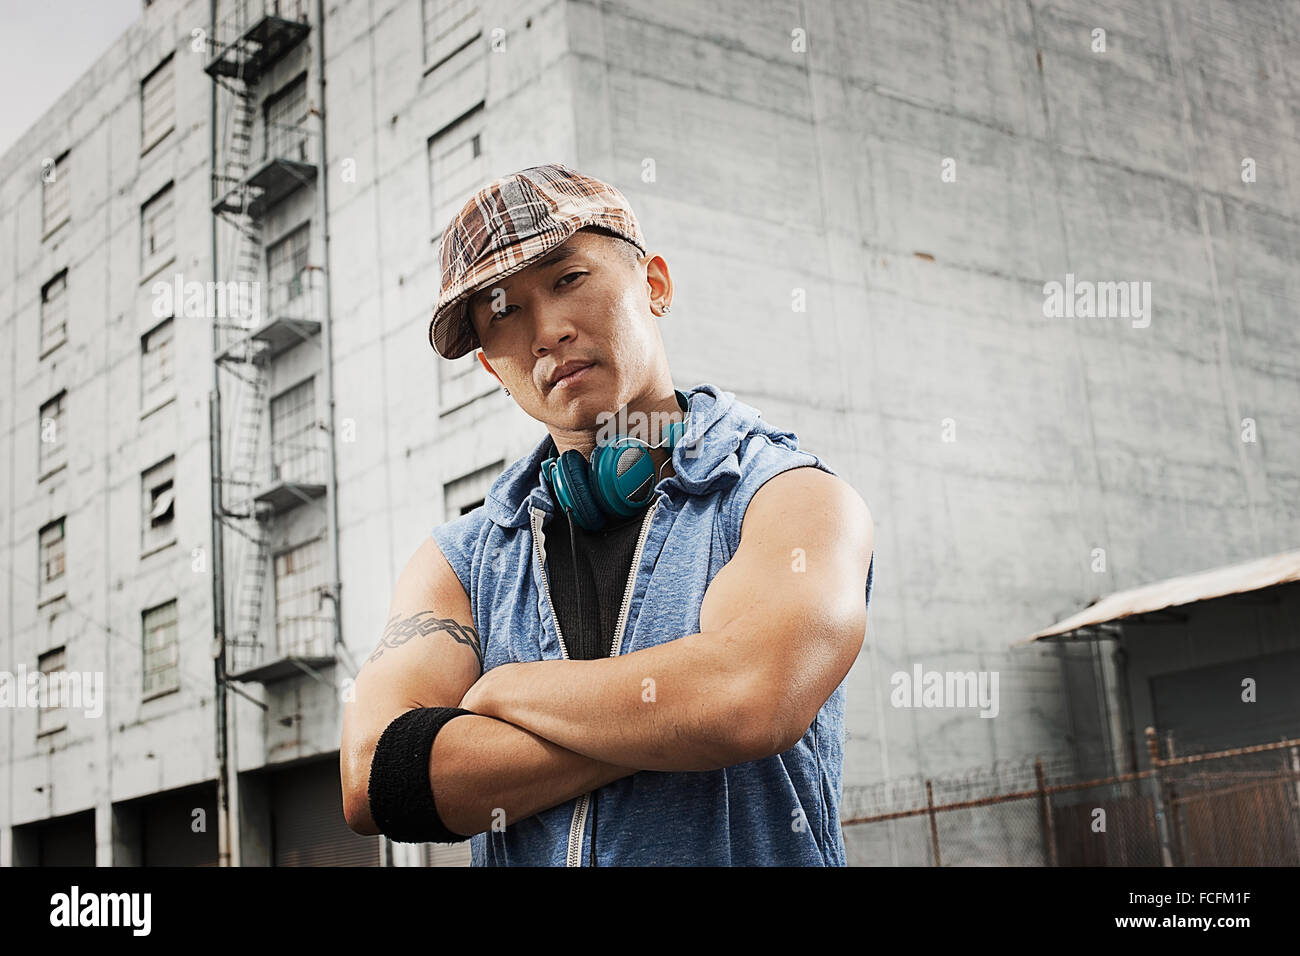 A young person in a denim sleeveless shirt, arms folded looking at the camera. Stock Photo